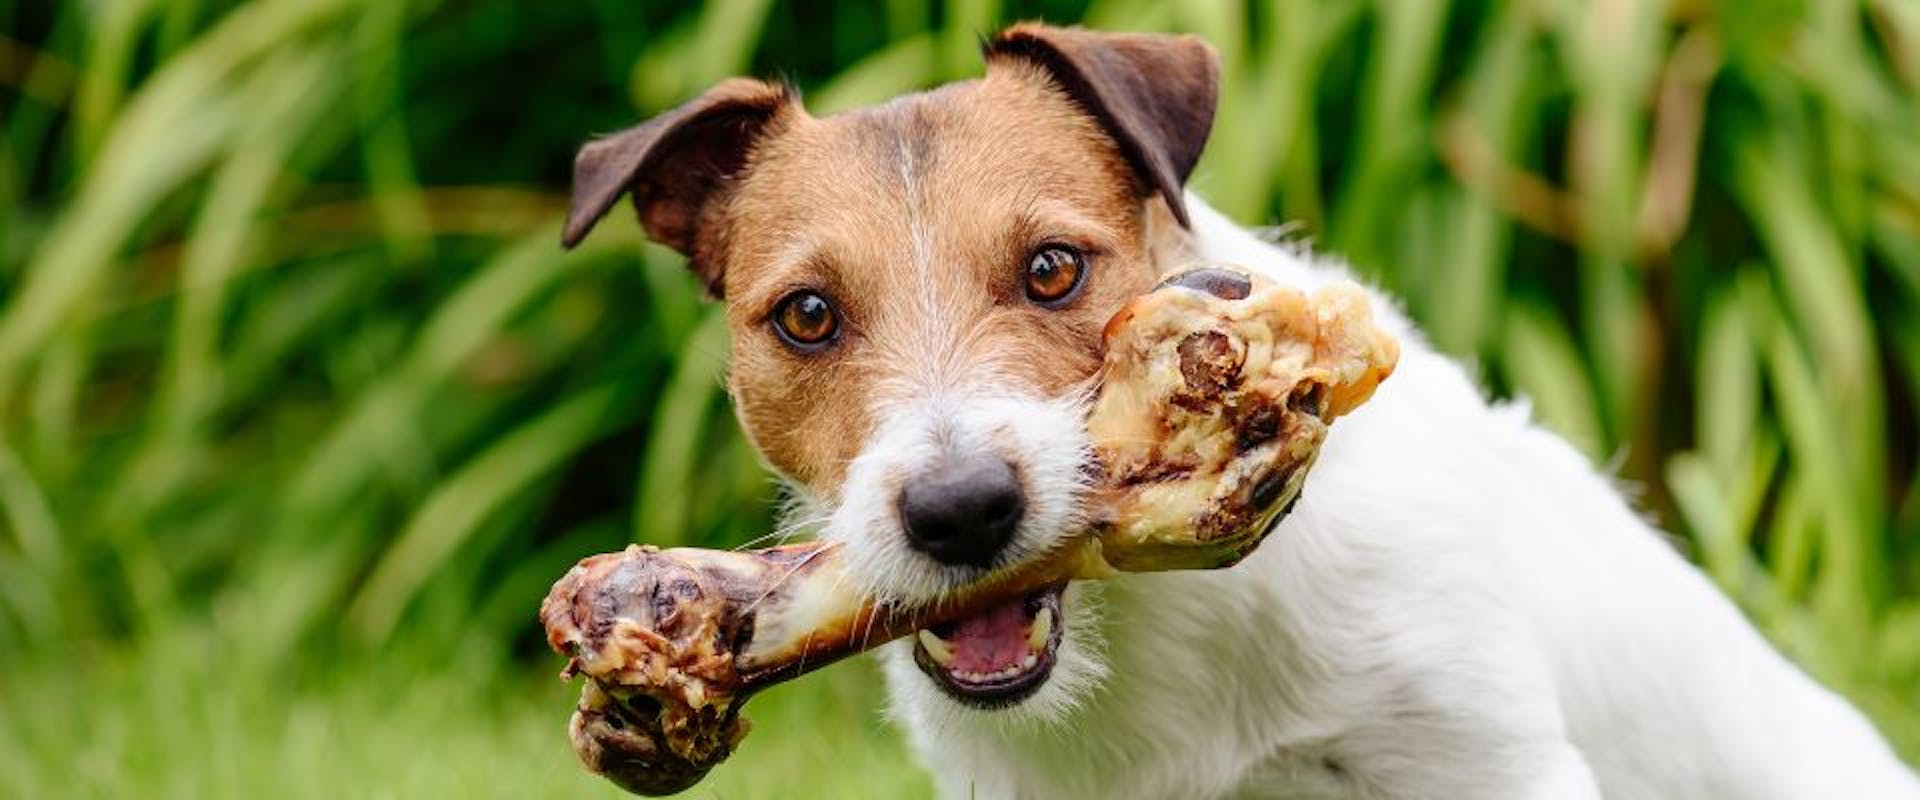 Jack Russell dog with a bone in its mouth